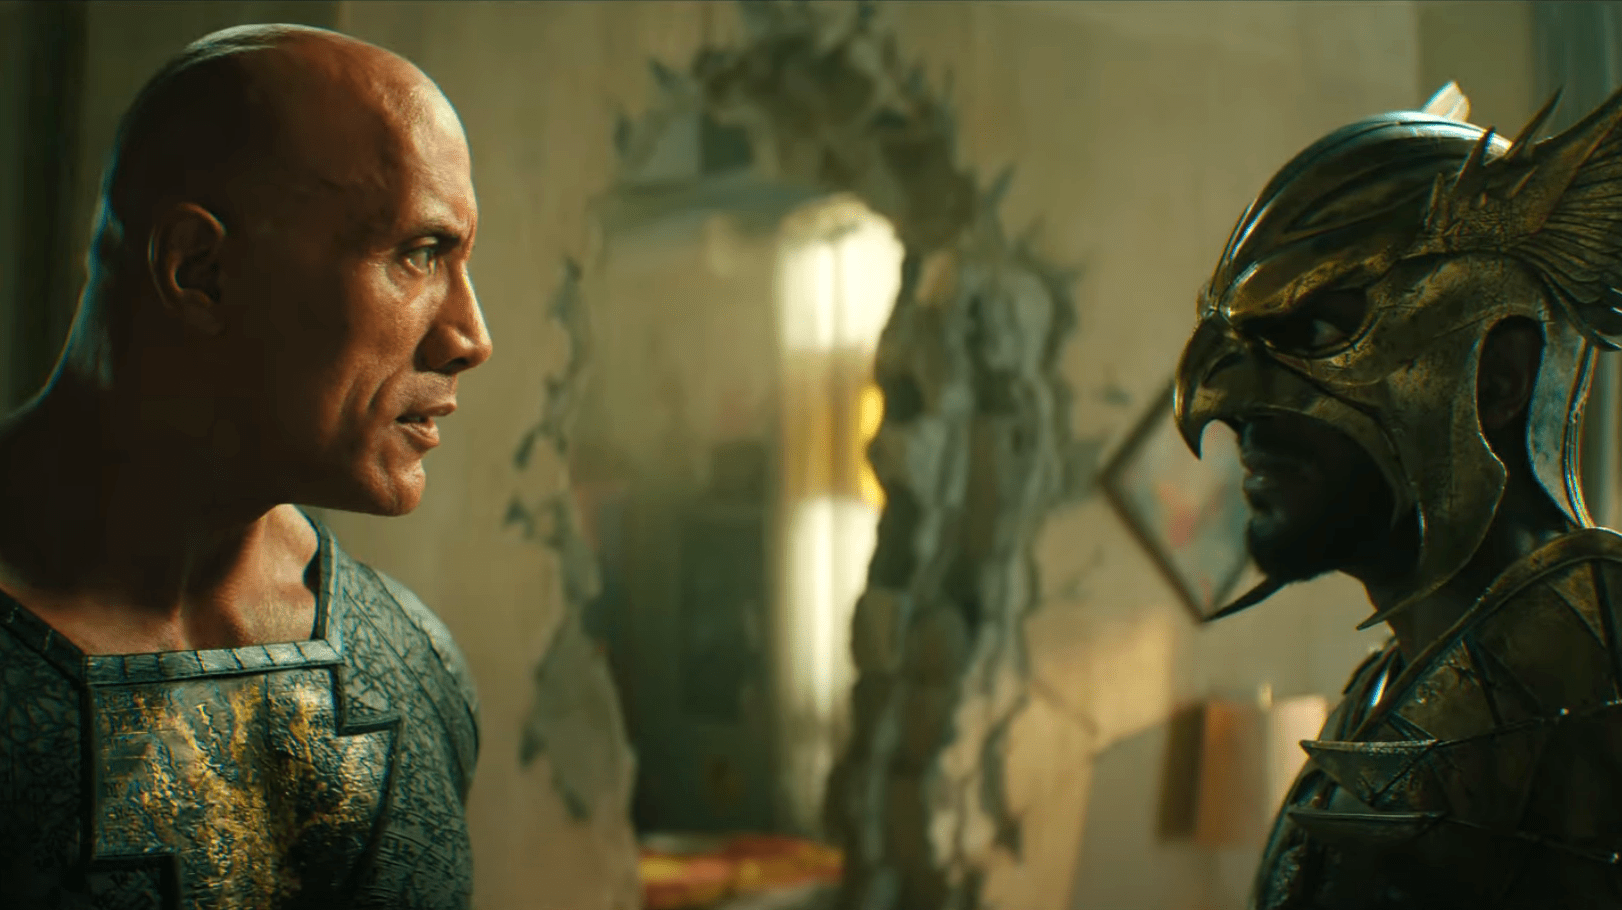 'Black Adam' trailer features Hawkman and more